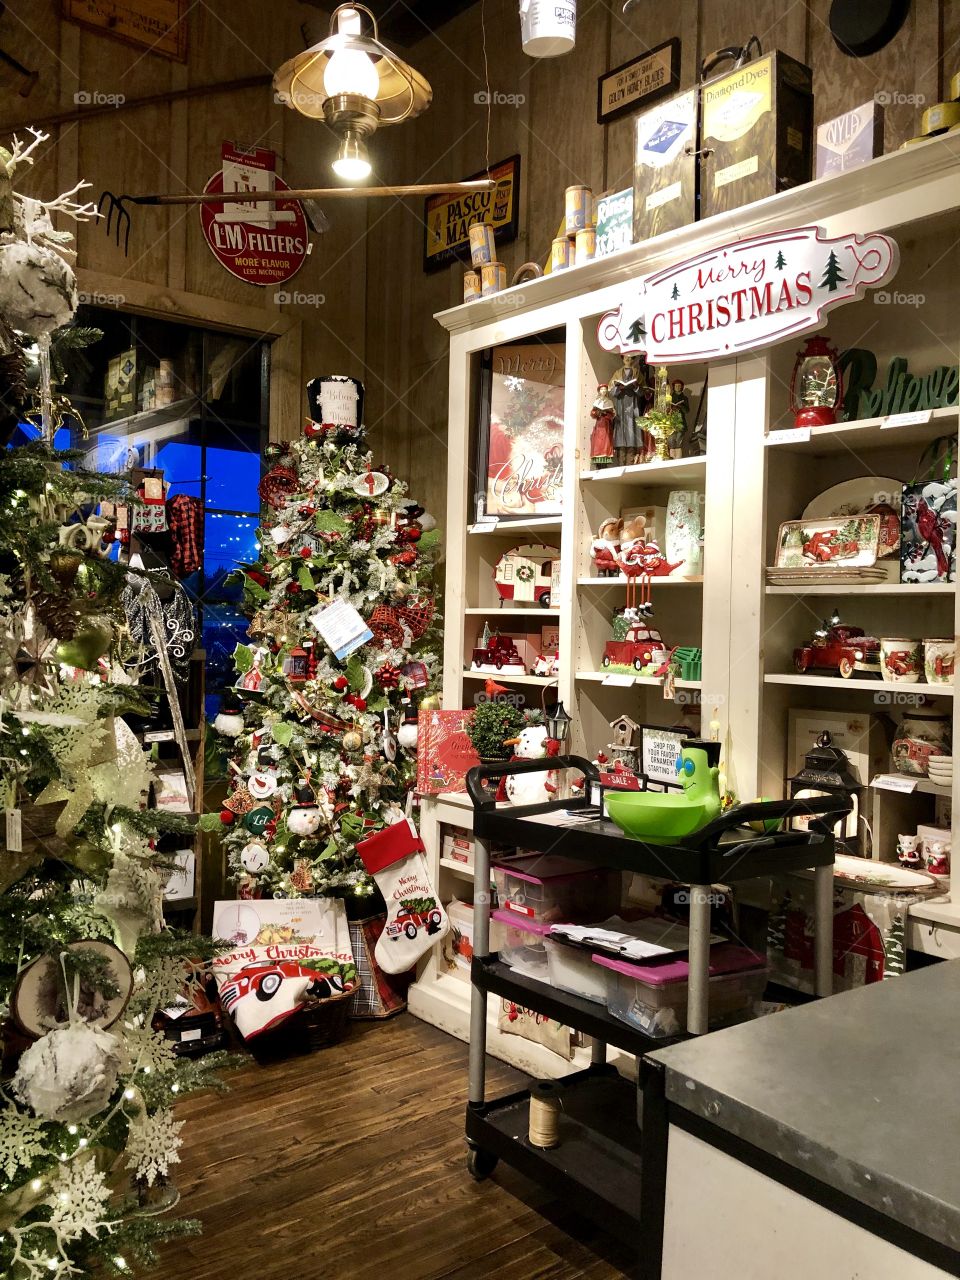 Christmas decorations and display Cracker Barrel old country store 